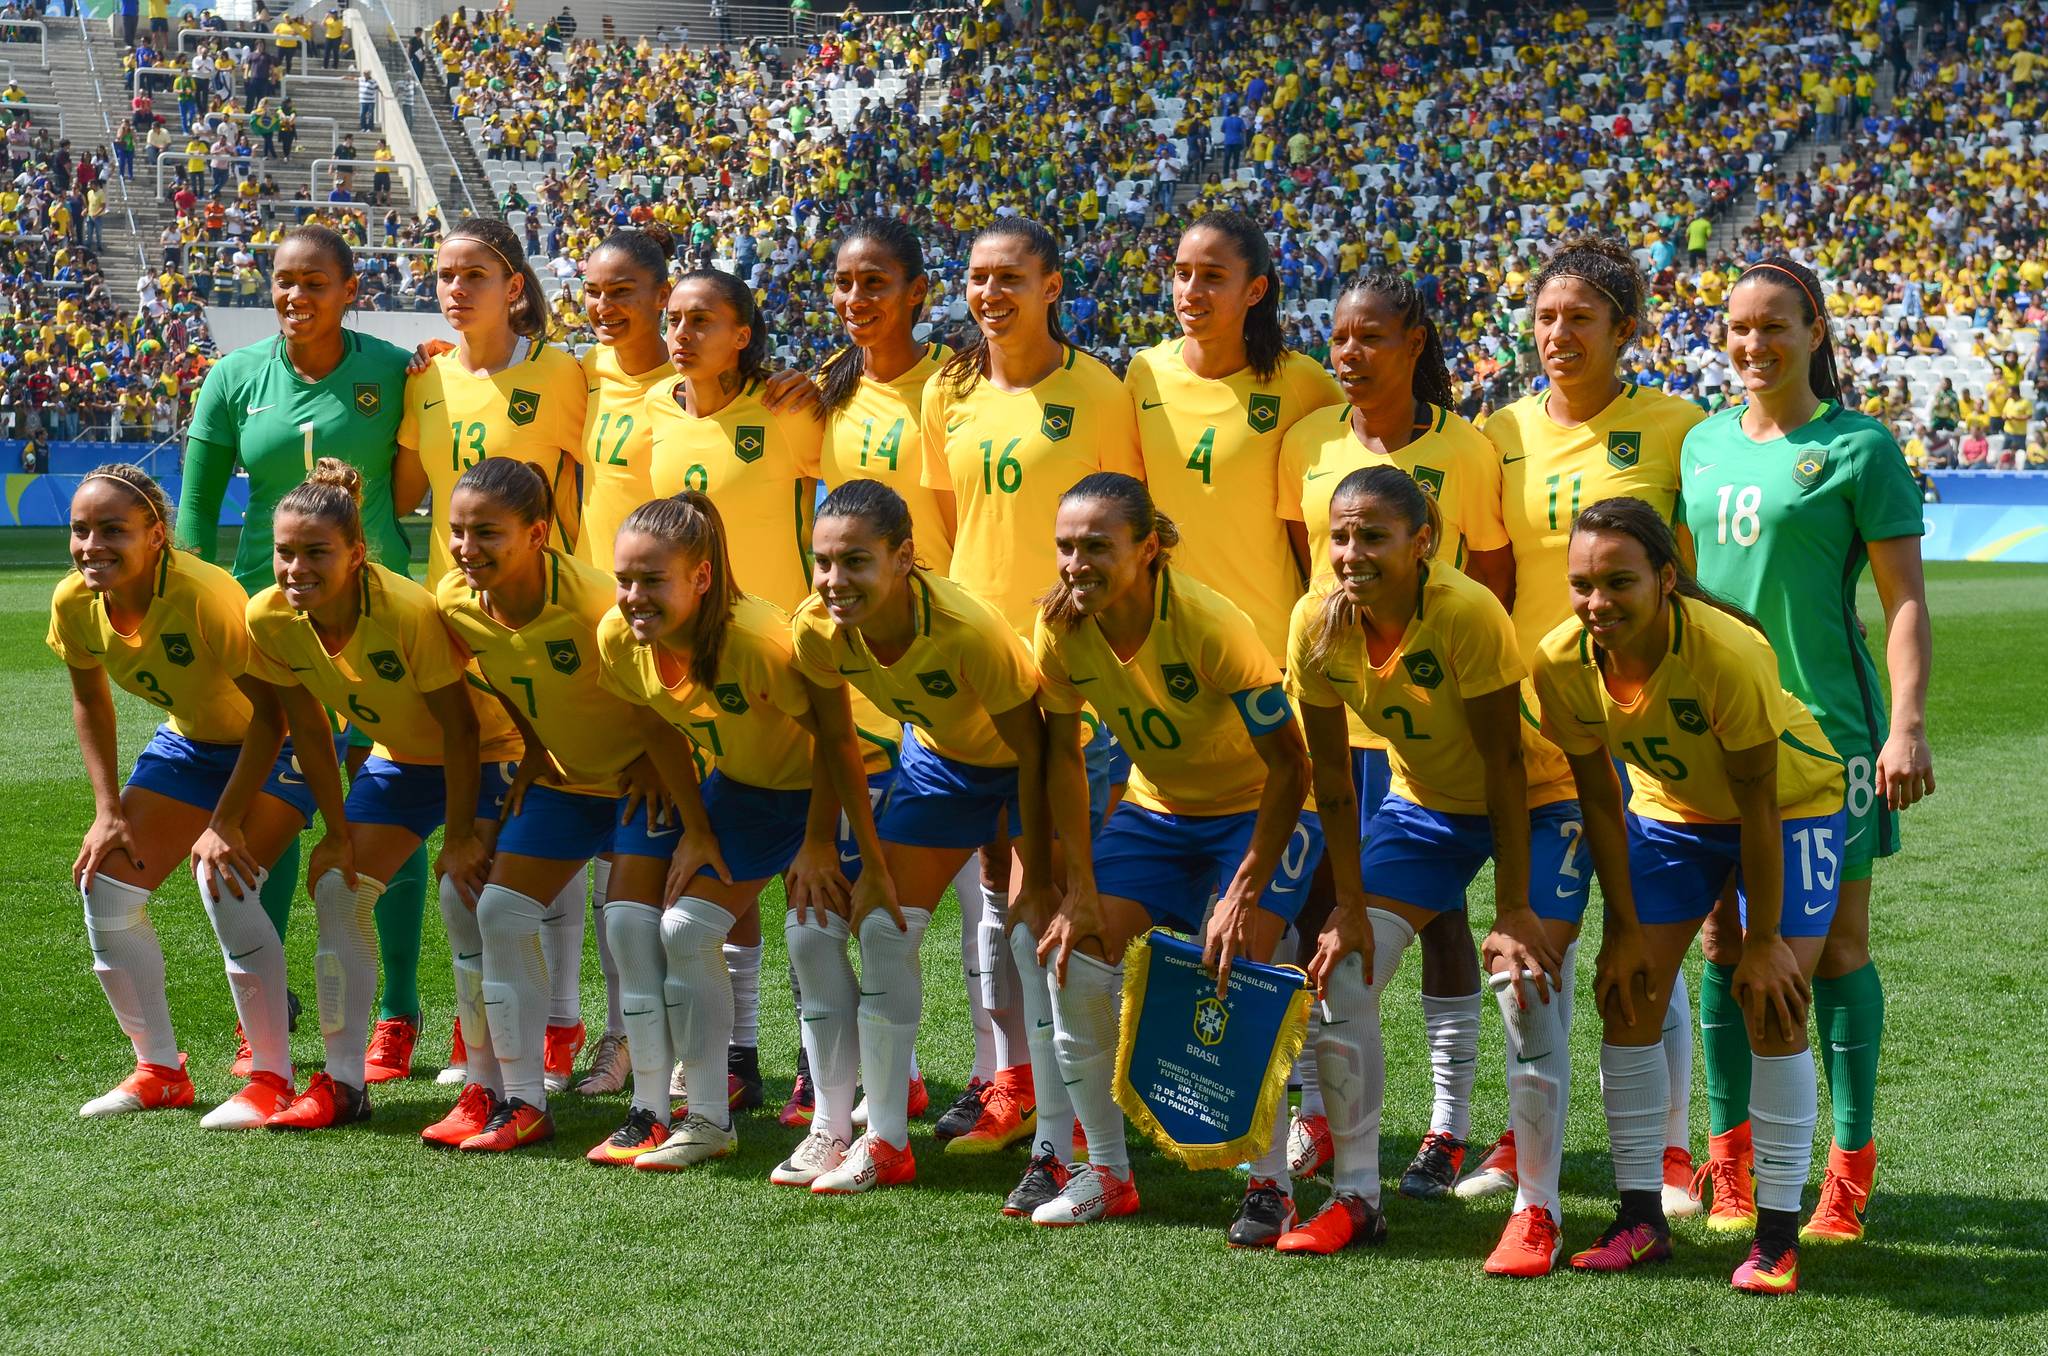 What’s next for women’s football in Brazil?